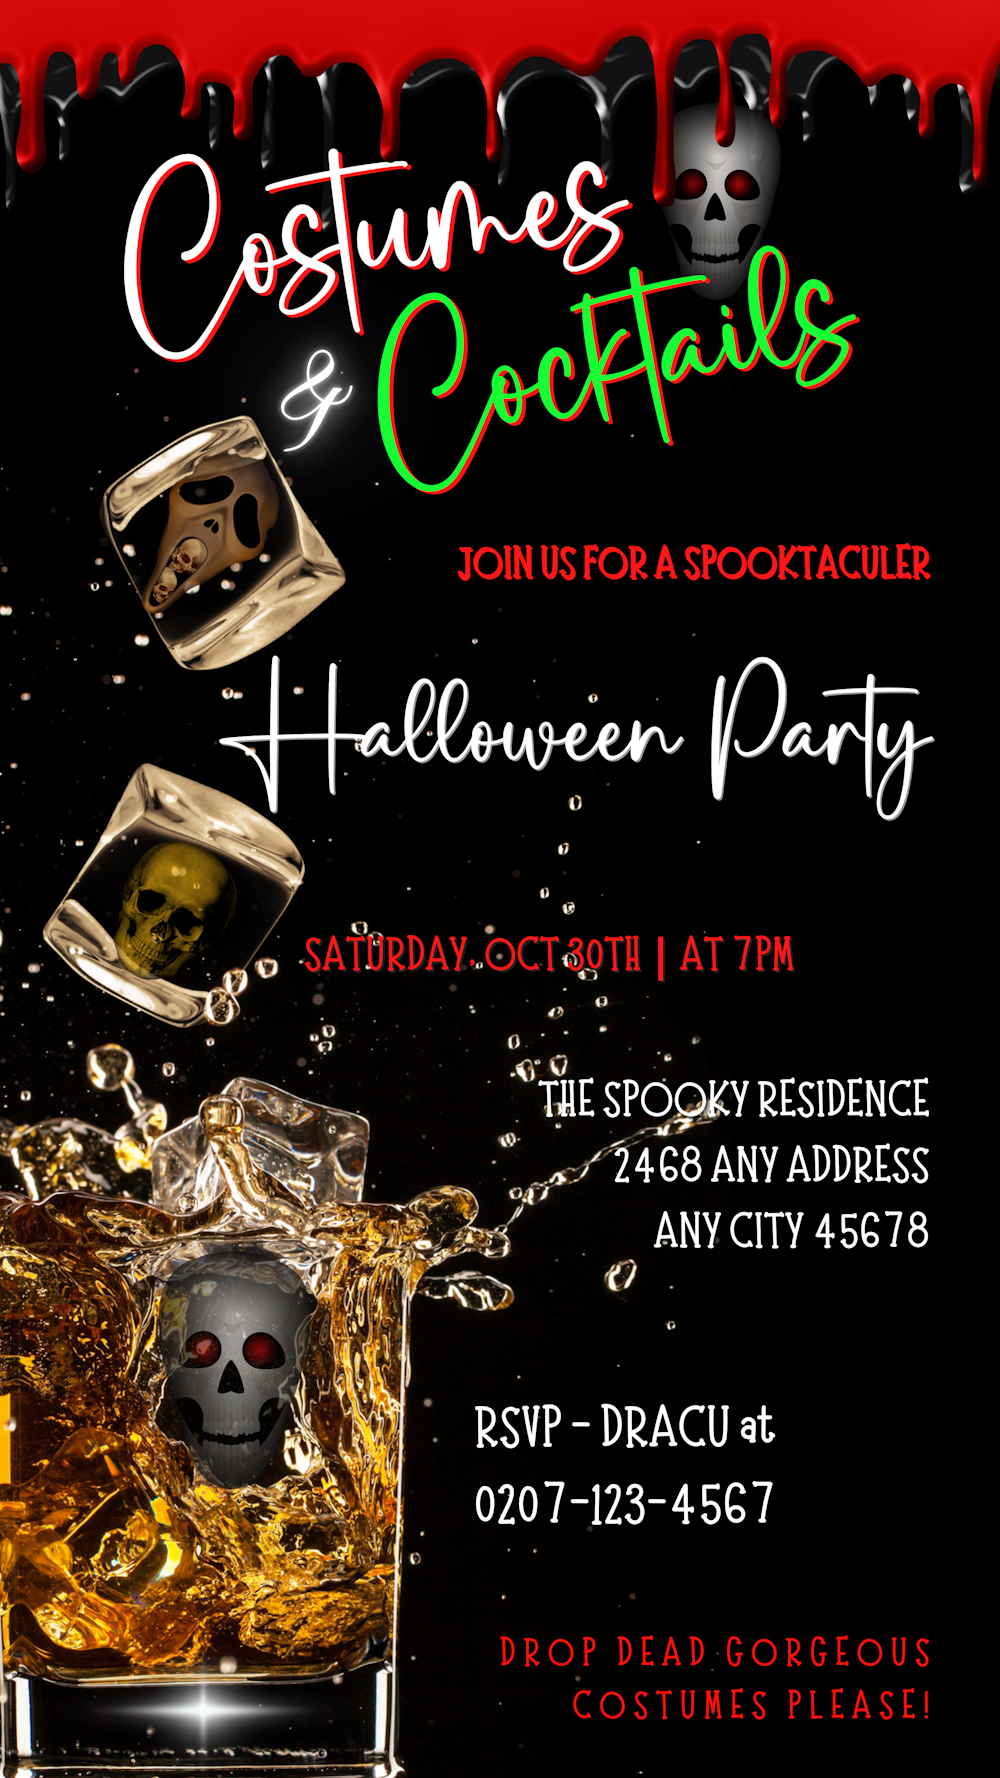 Poster for Halloween party featuring a skull in an ice cube, customizable via Canva for digital invitations. Product: Costumes & Cocktails Cubes Glass of Skulls | Halloween Party Evite.